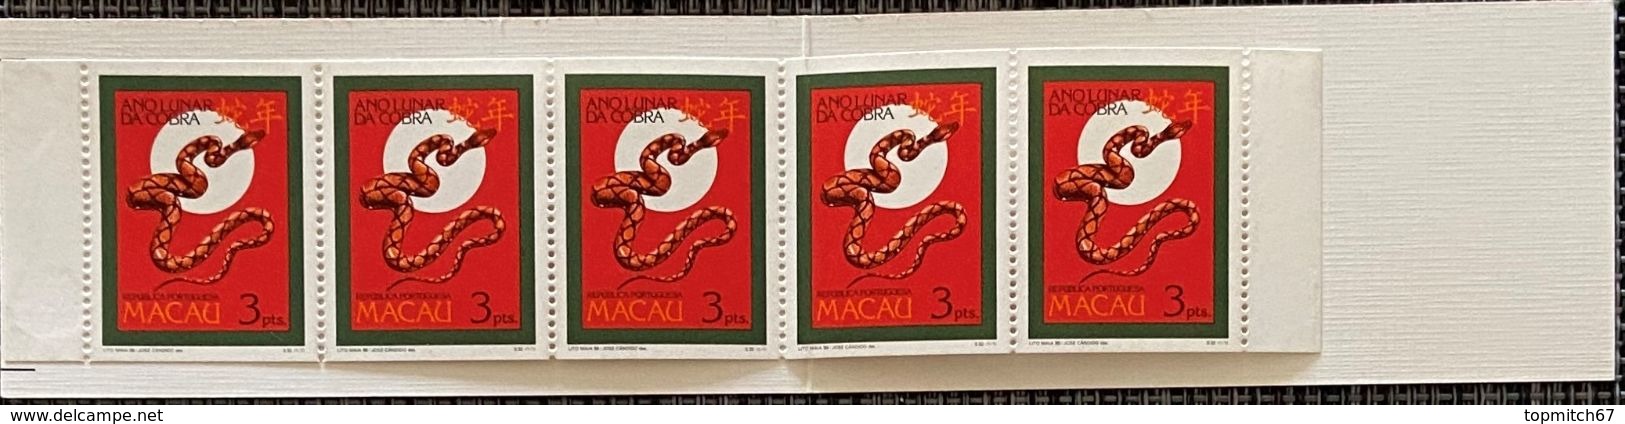 MAC2526MNH-Lunar Year Of The Snake Booklet Of 5 MNH Stamps - Macau - 1989 - Carnets